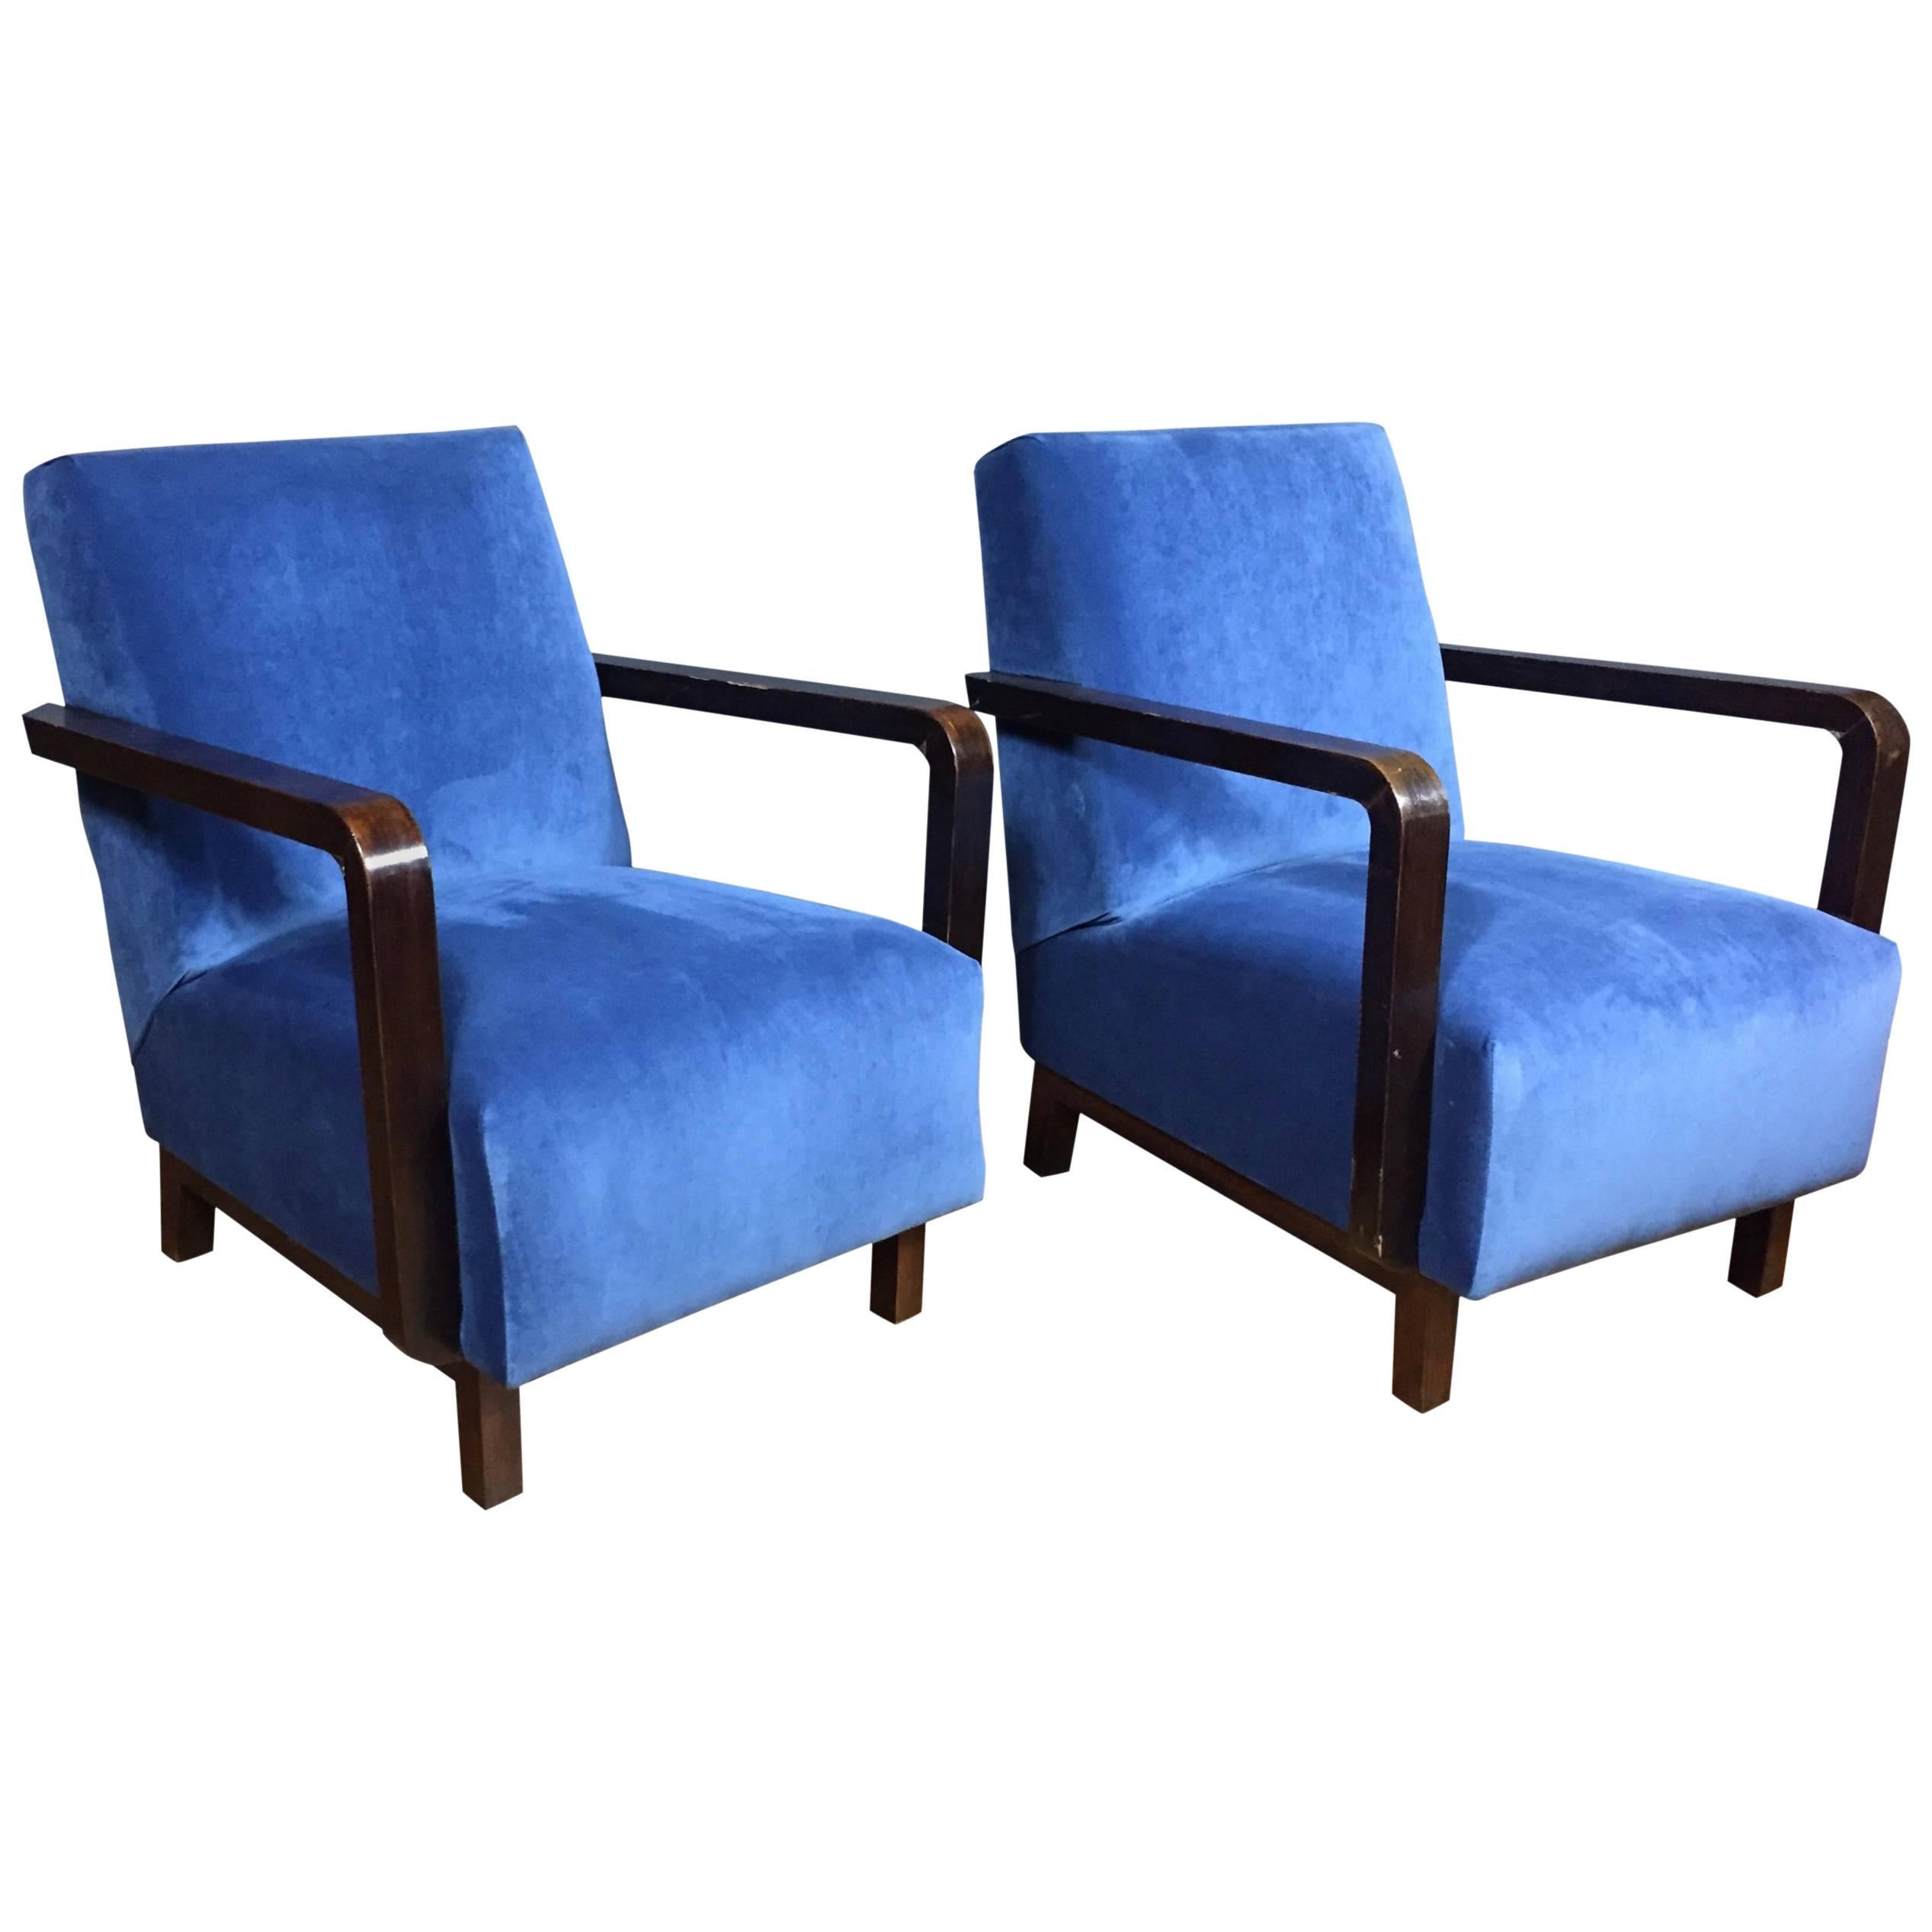 Pair of Danish, 1940s Armchairs with Navy Velvet Covers For Sale